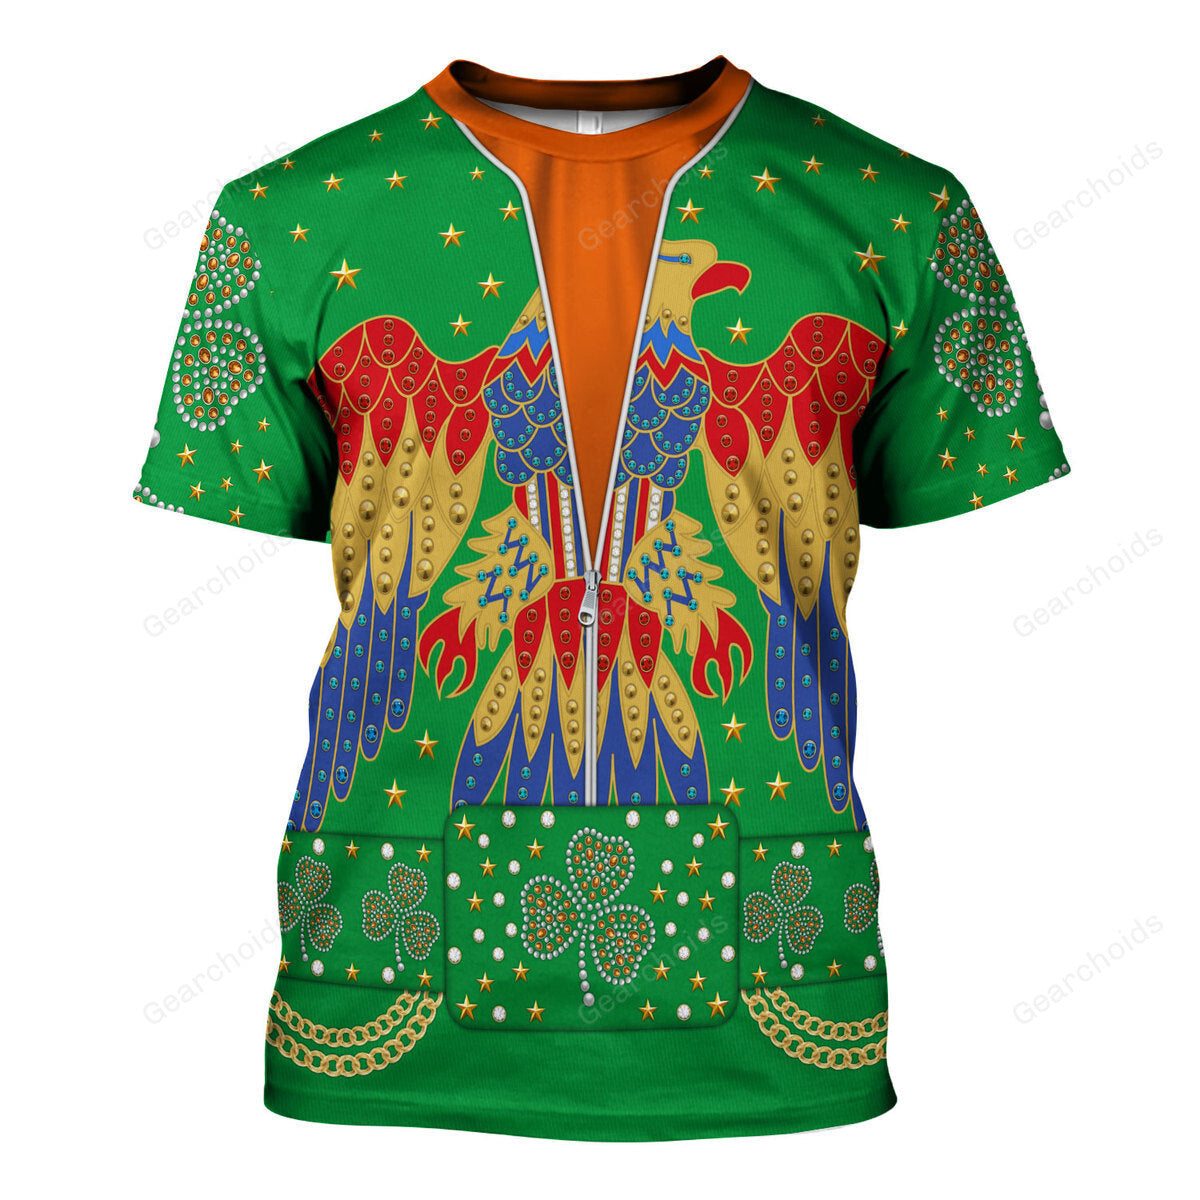 Celebrating The King Elvis Presley Costume For St. Patrick's Day - Costume Cosplay T-Shirt